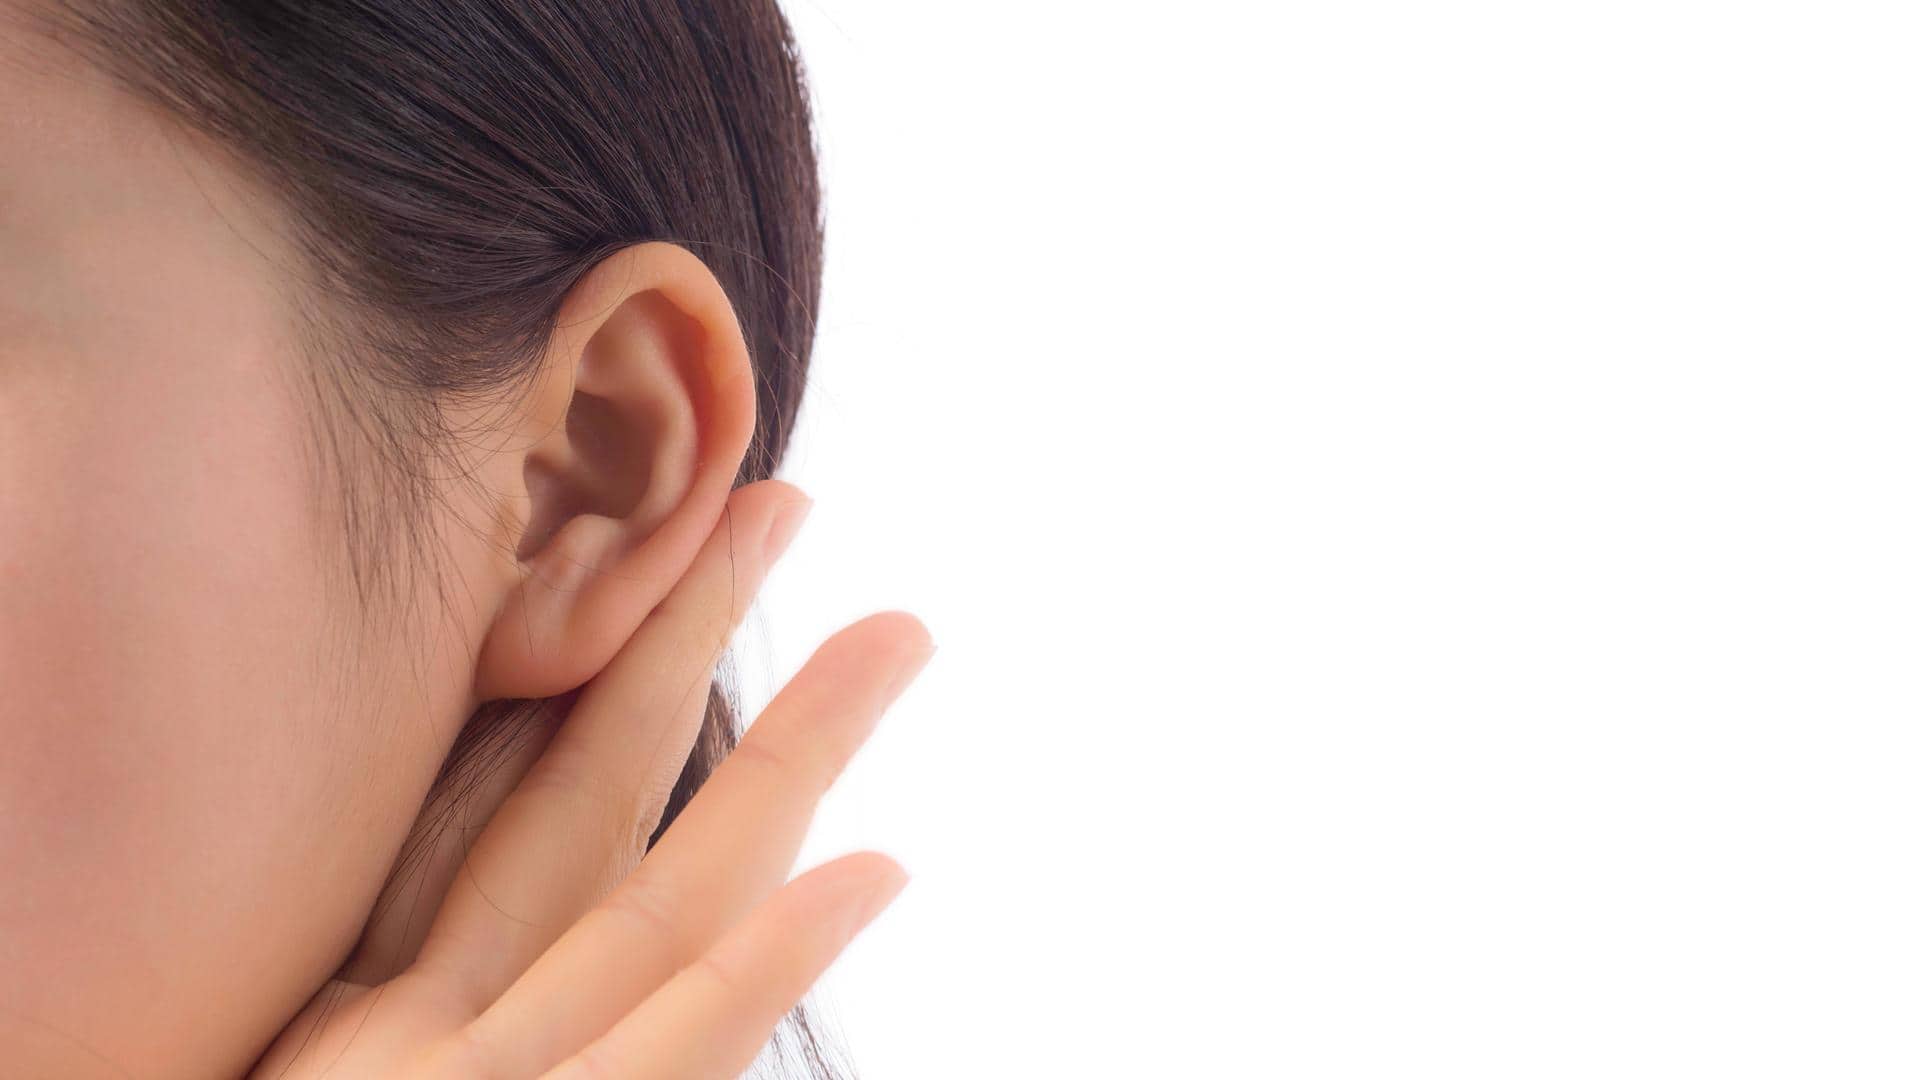 What your ears say about your health